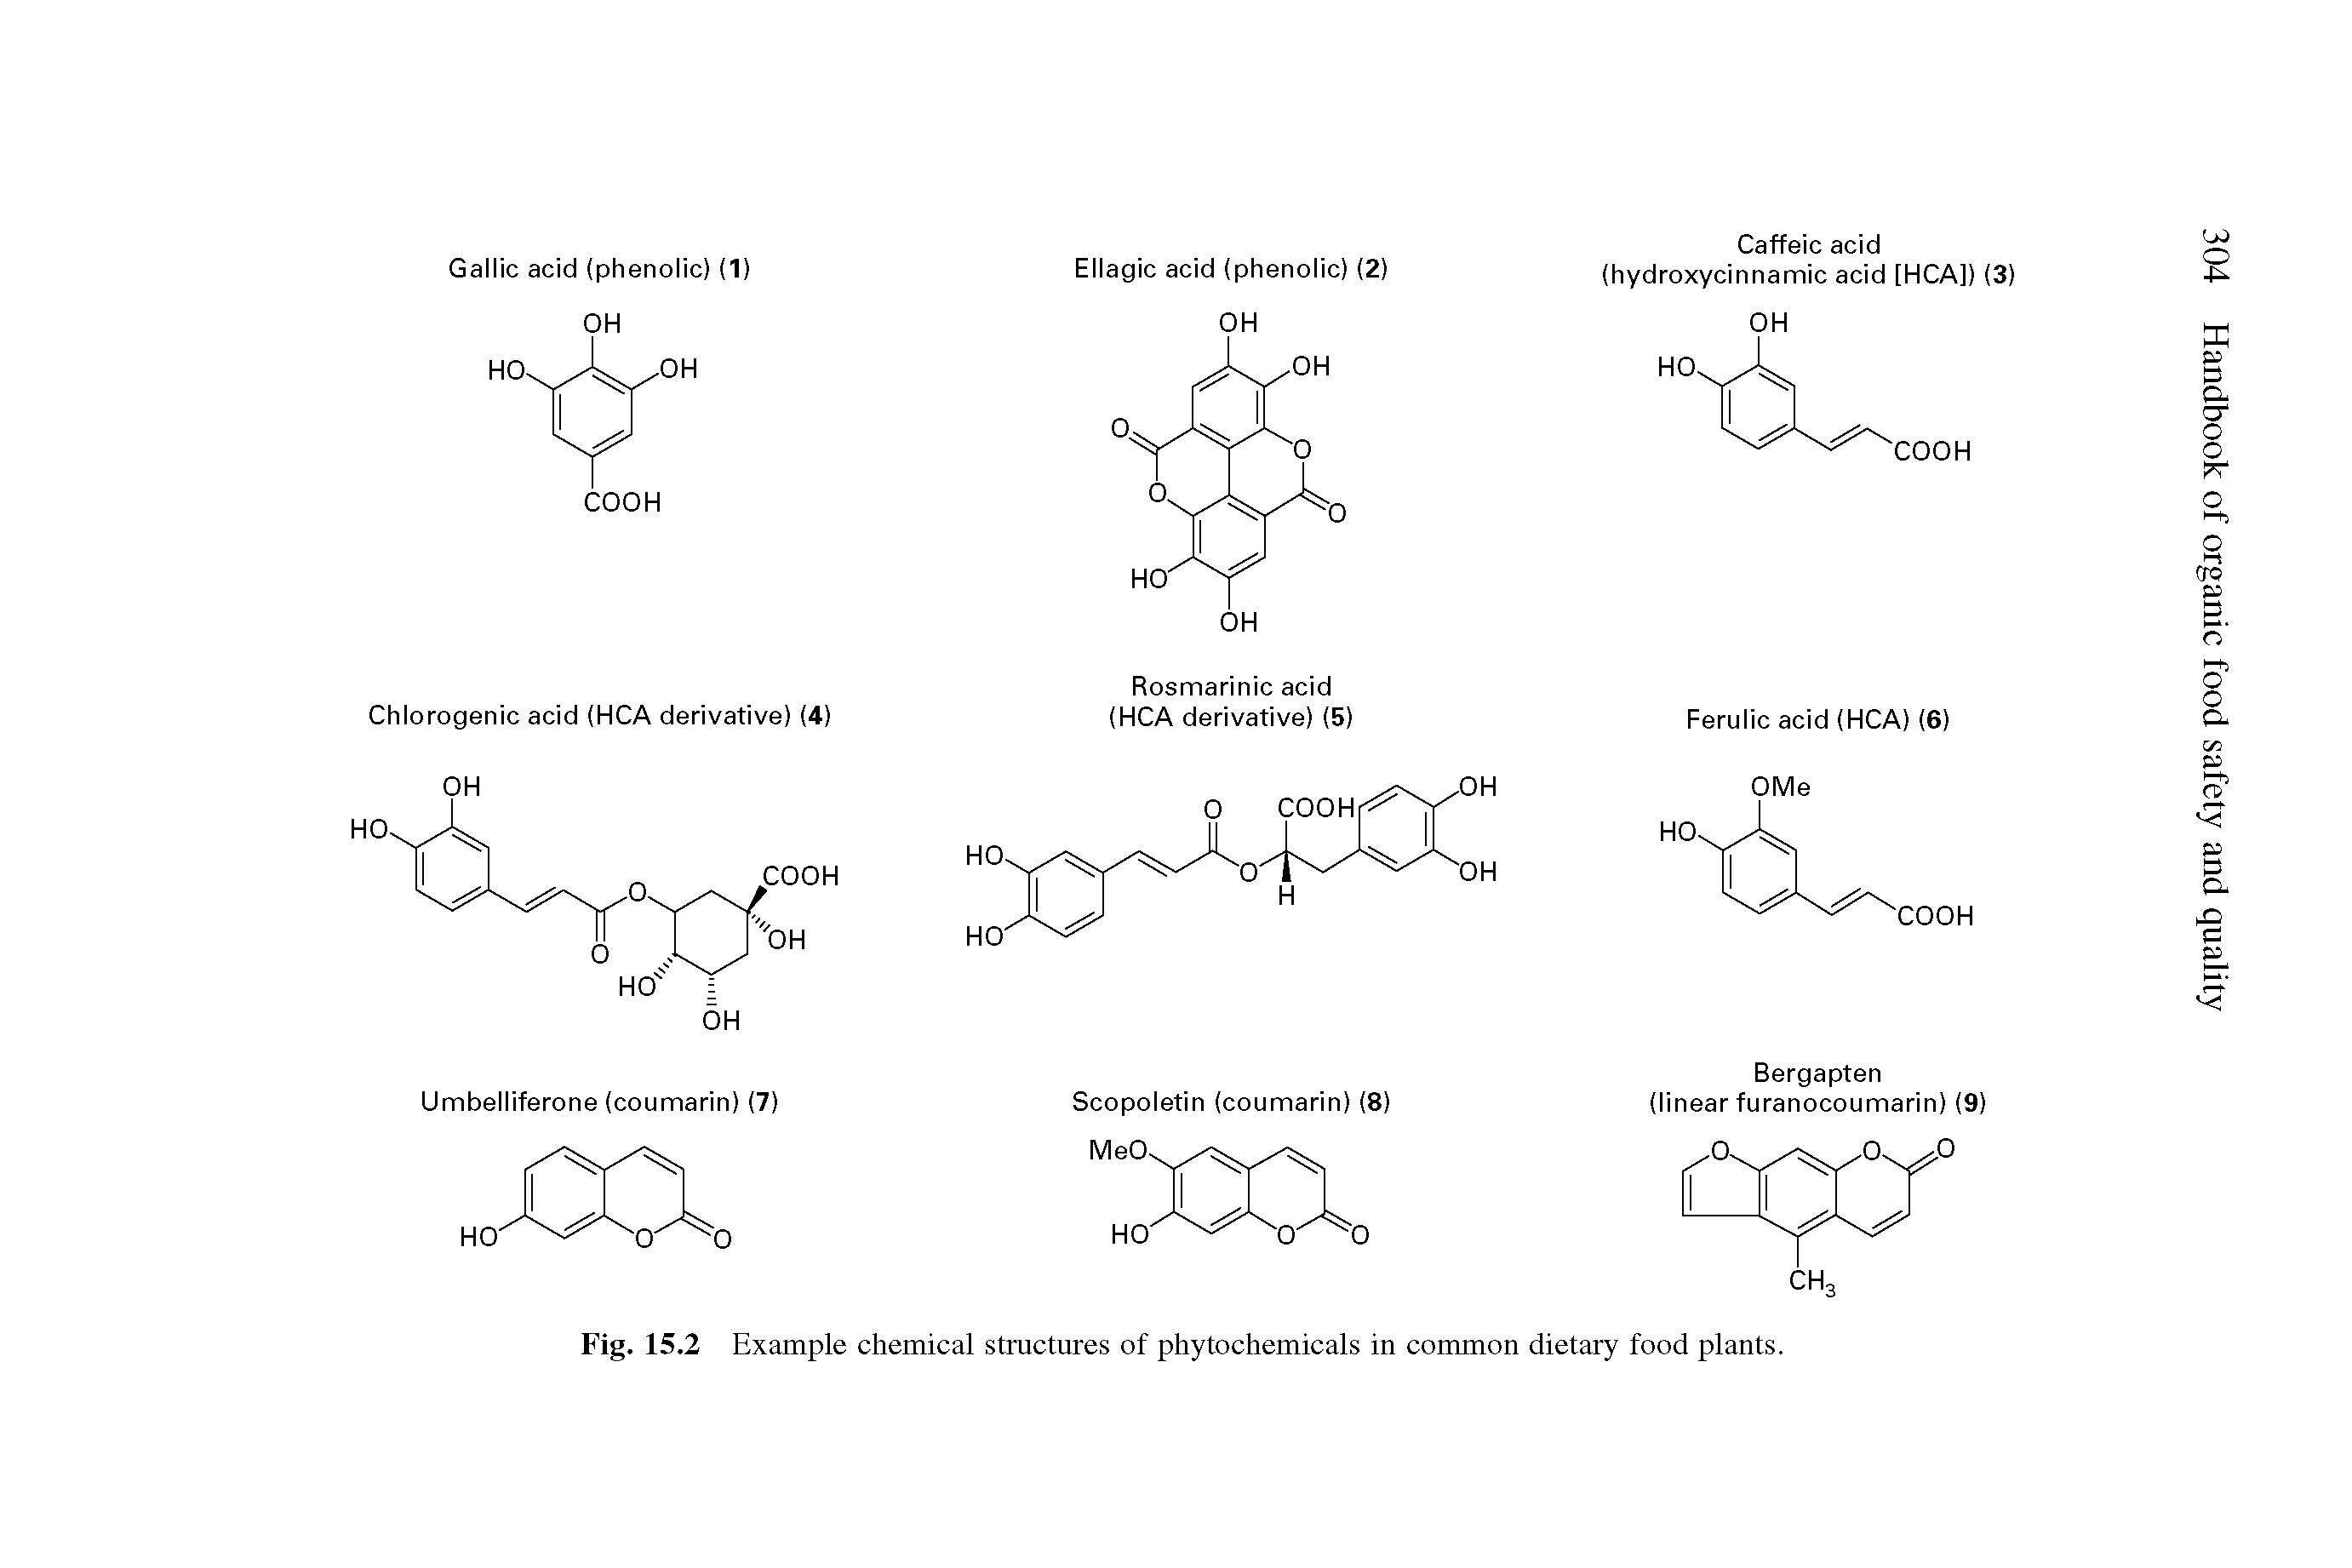 Fig. 15.2 Example chemical structures of phytochemicals in common dietary food plants.